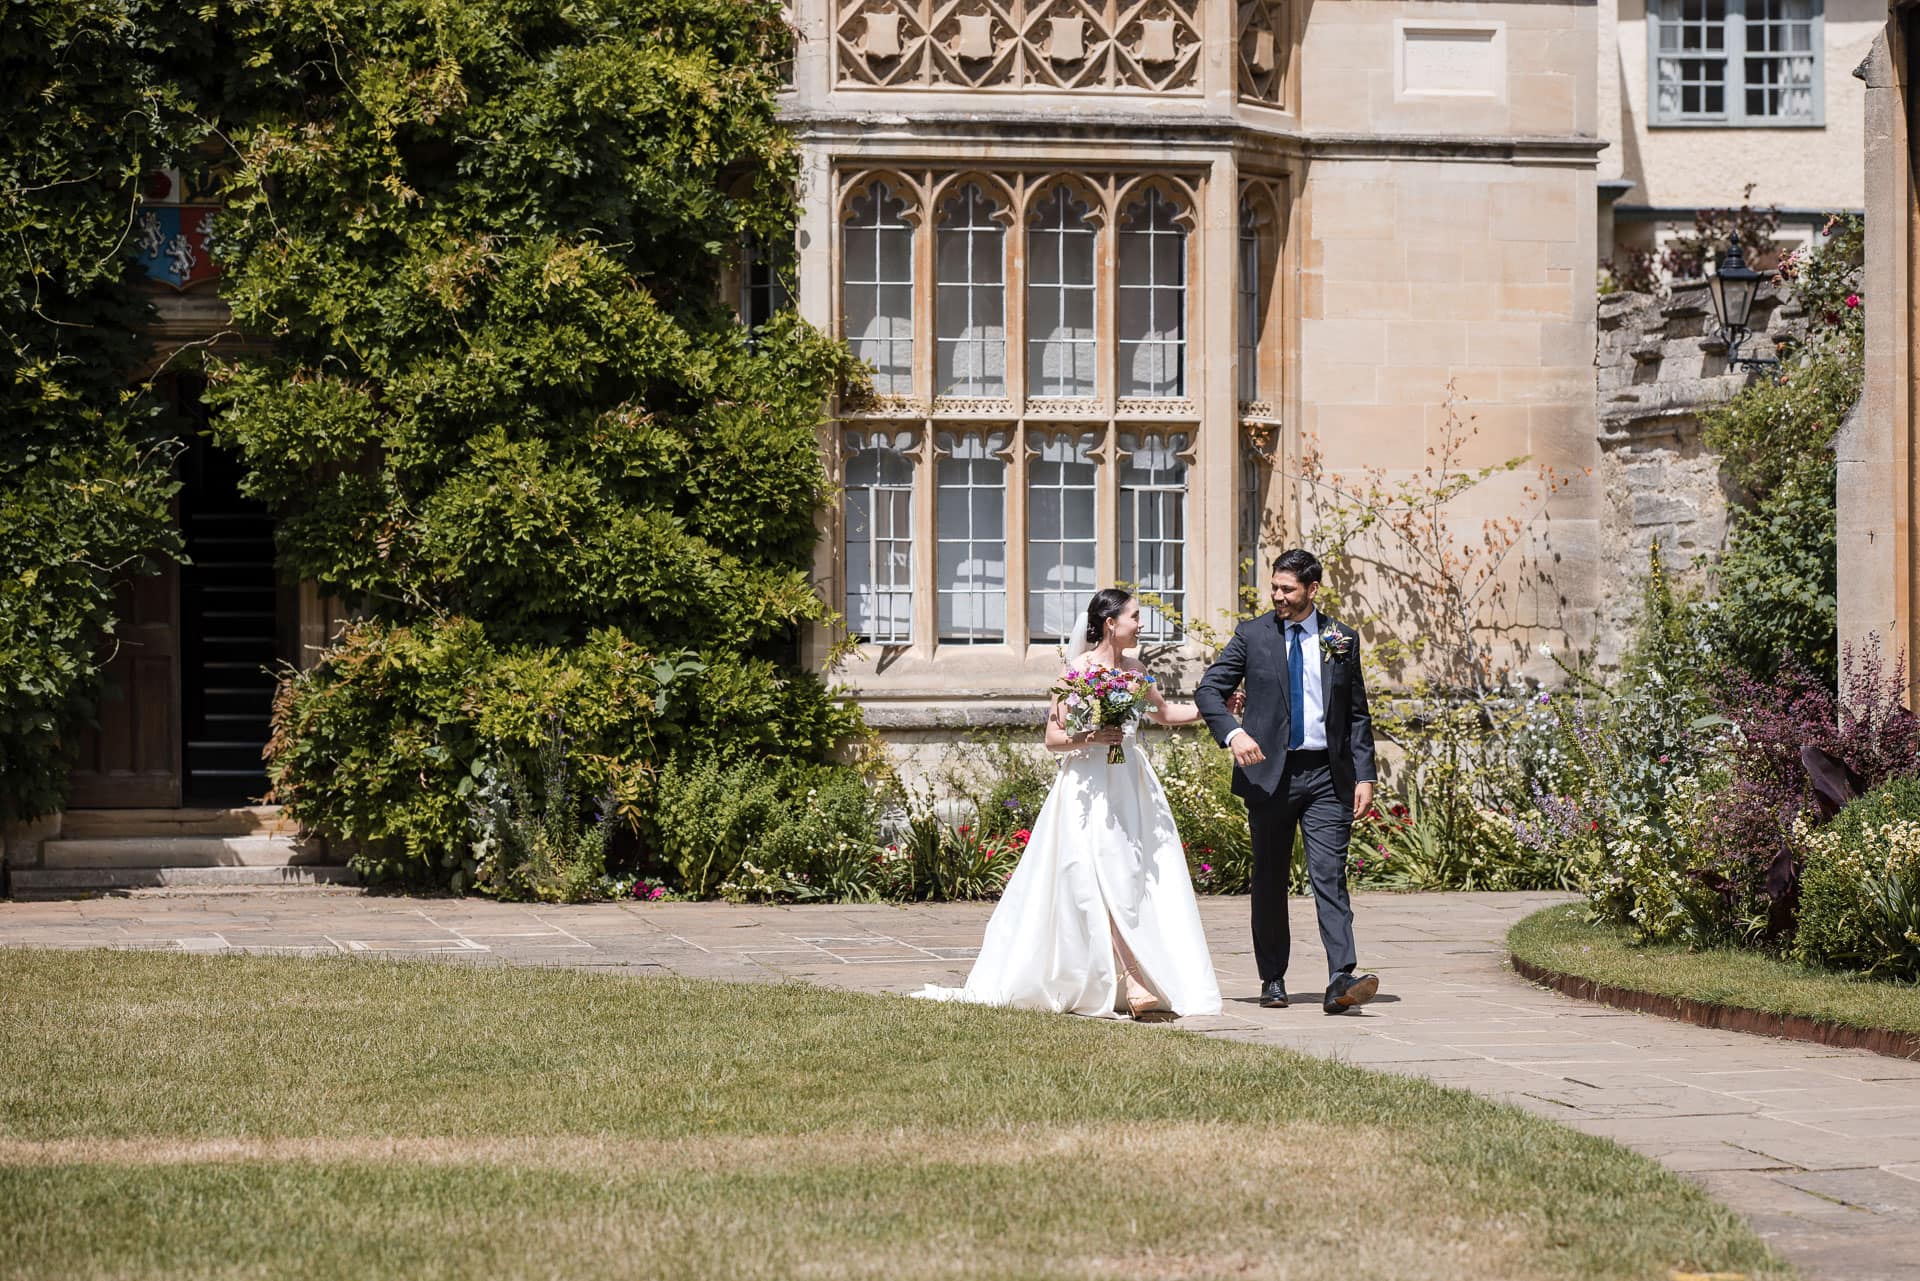 The Bride and her brother walking together in the grounds of Pembroke College.